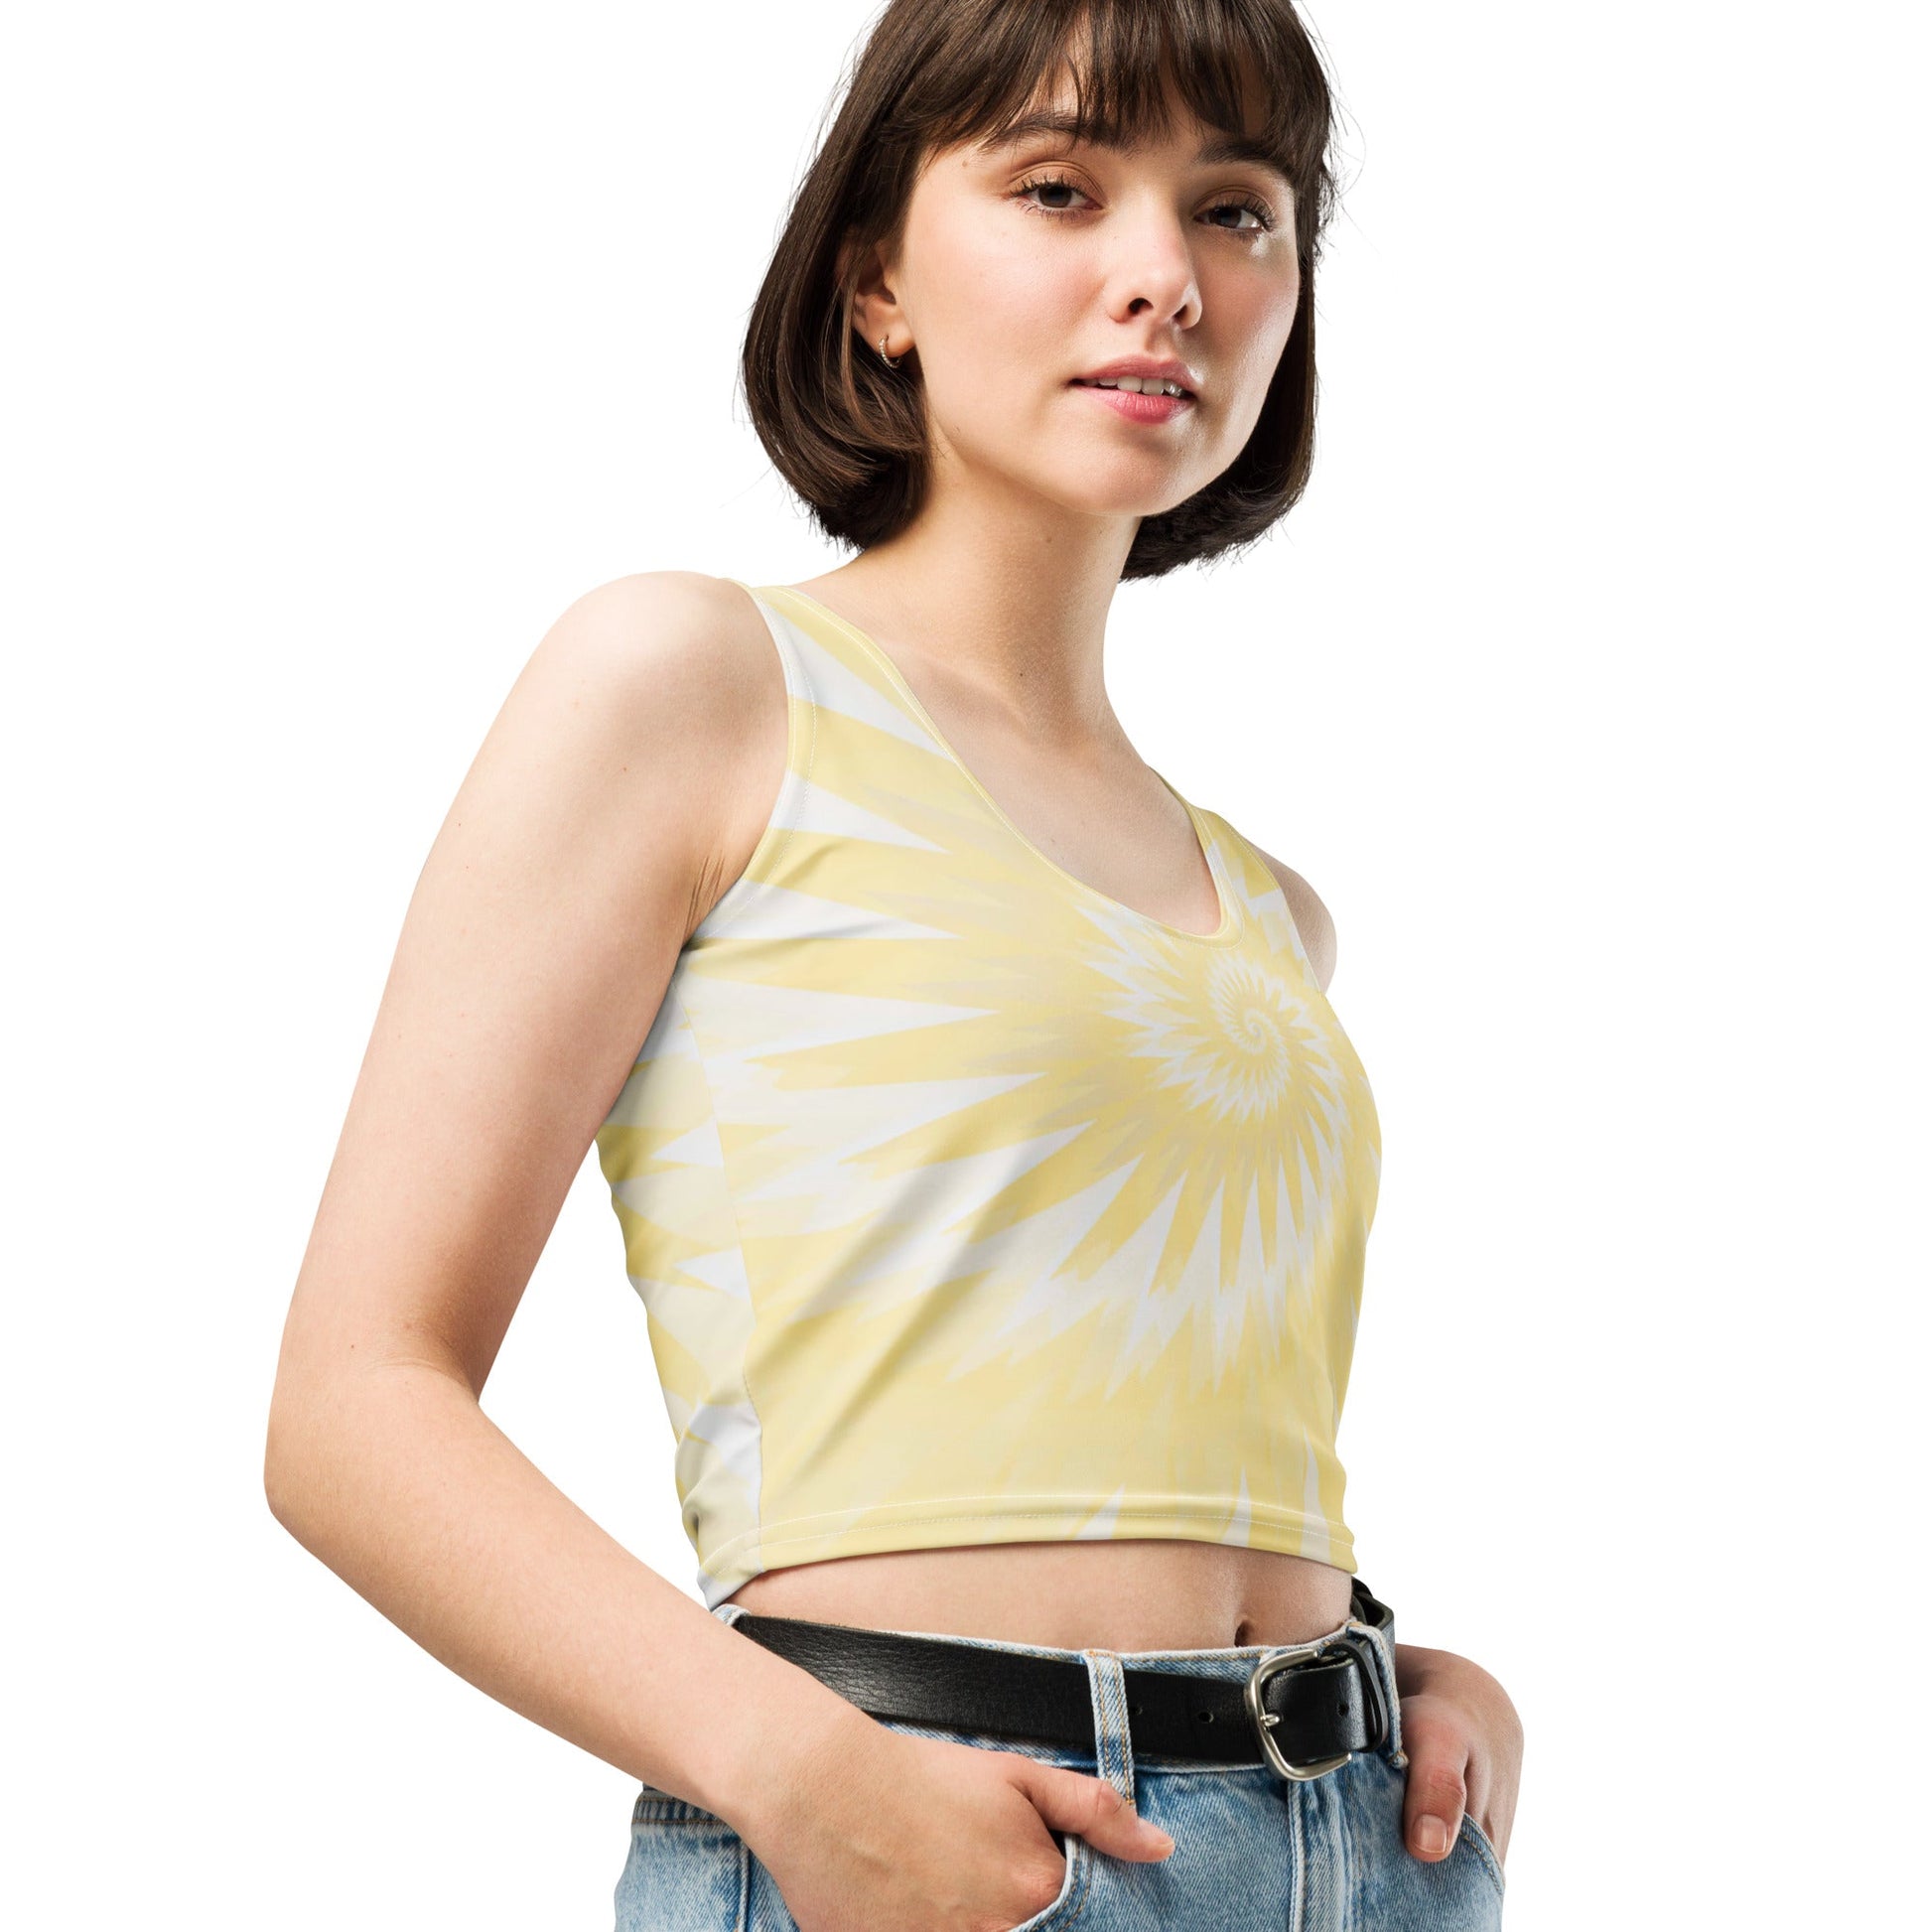 Be Extra! Silky Sun Tie-Dye Crop Top - BeExtra! Apparel & More